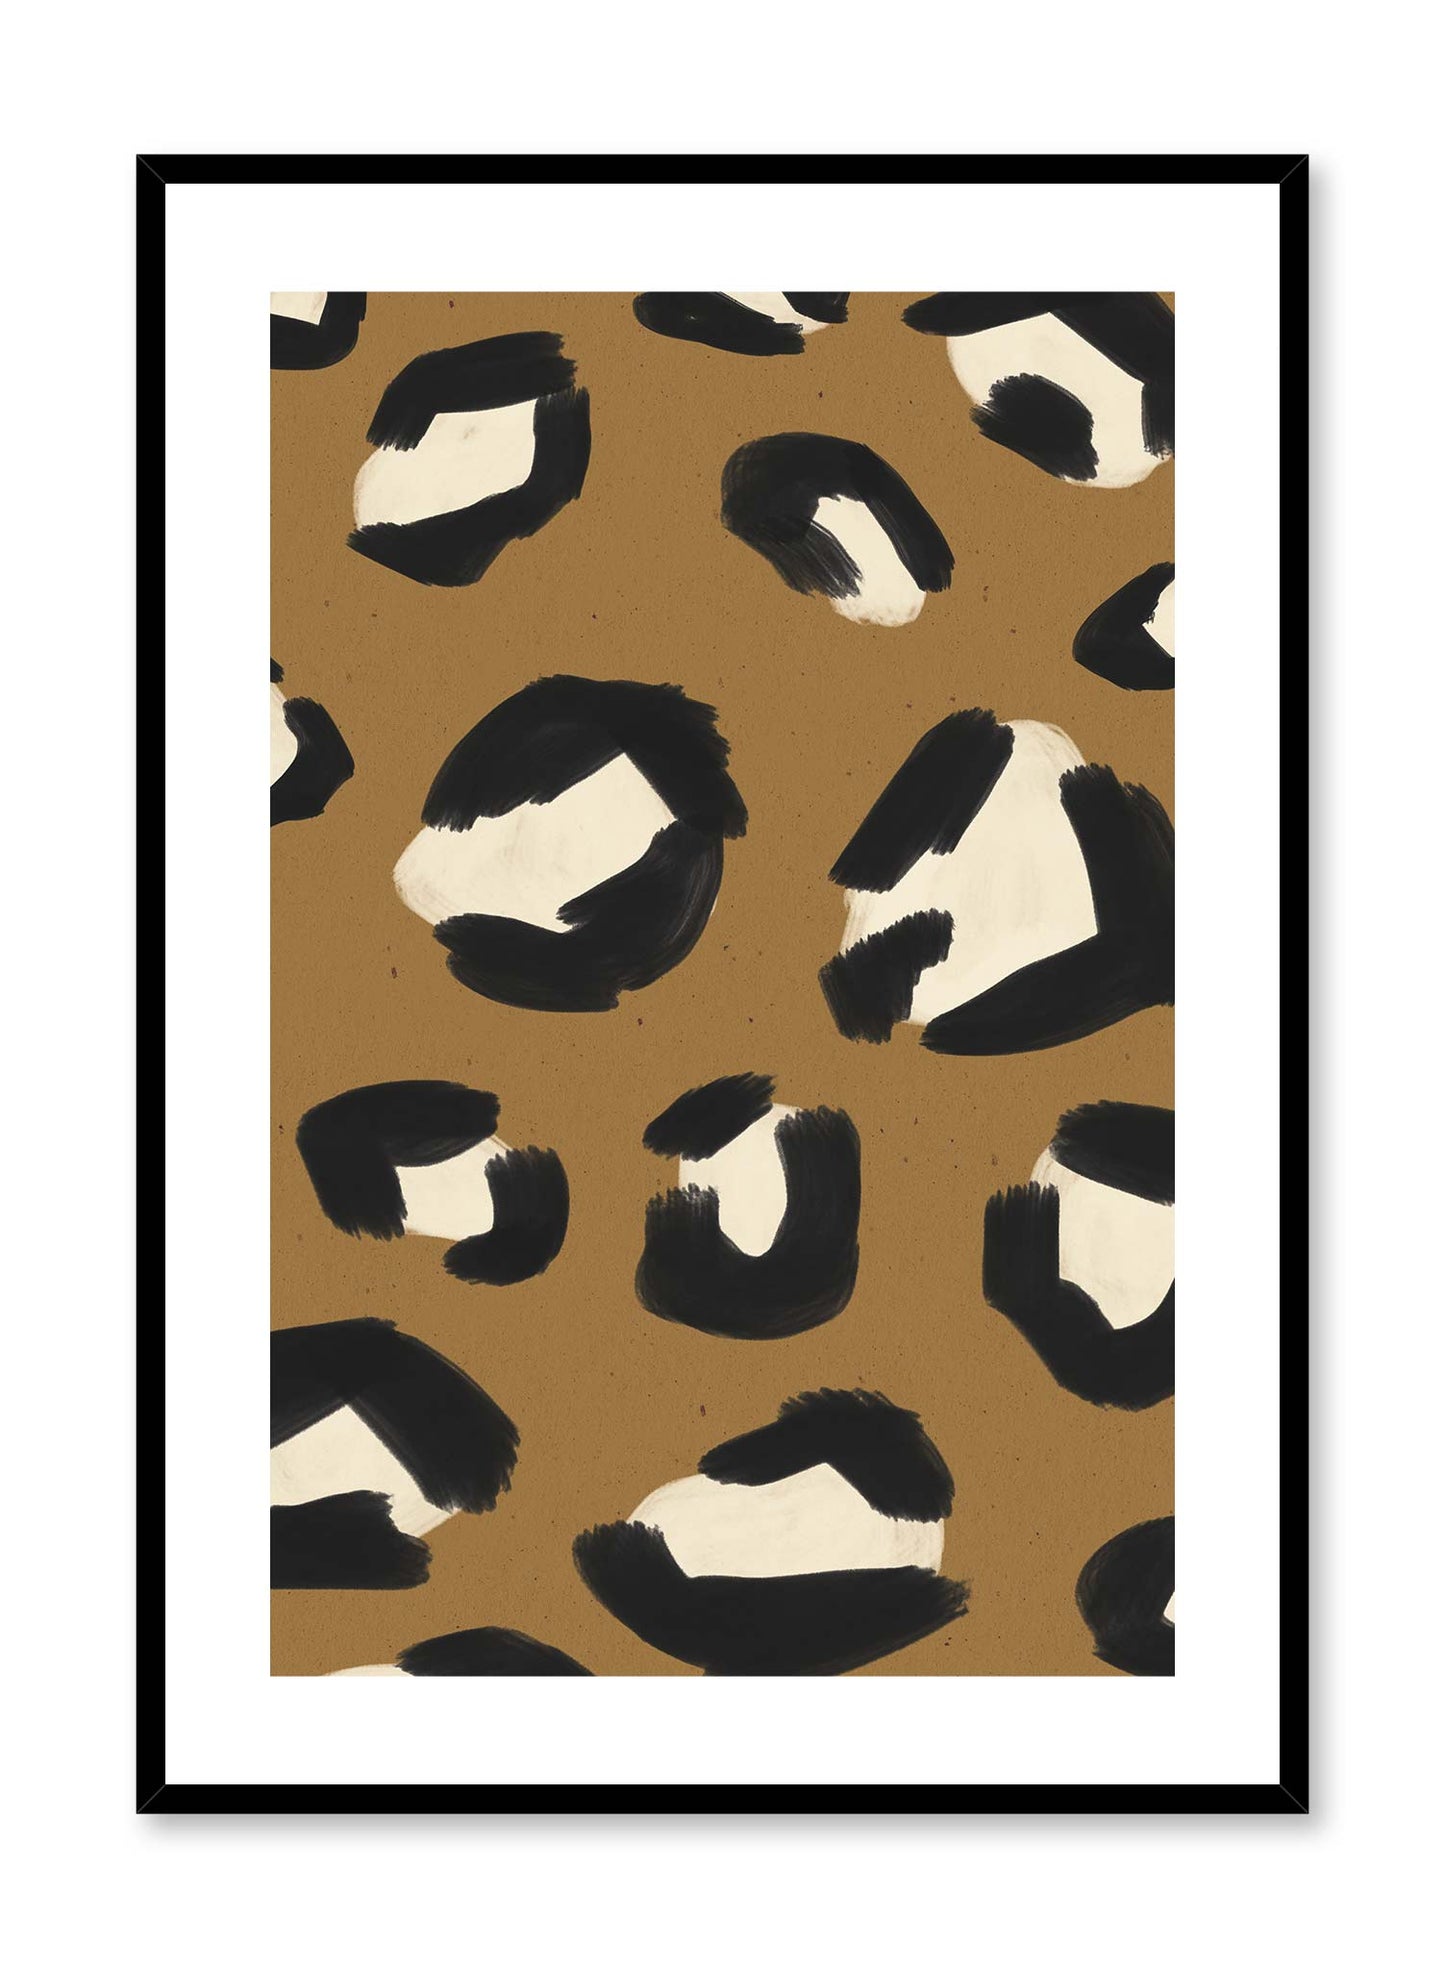 Cheetah Print is a minimalist illustration of the close-up view of a cheetah print by Opposite Wall.